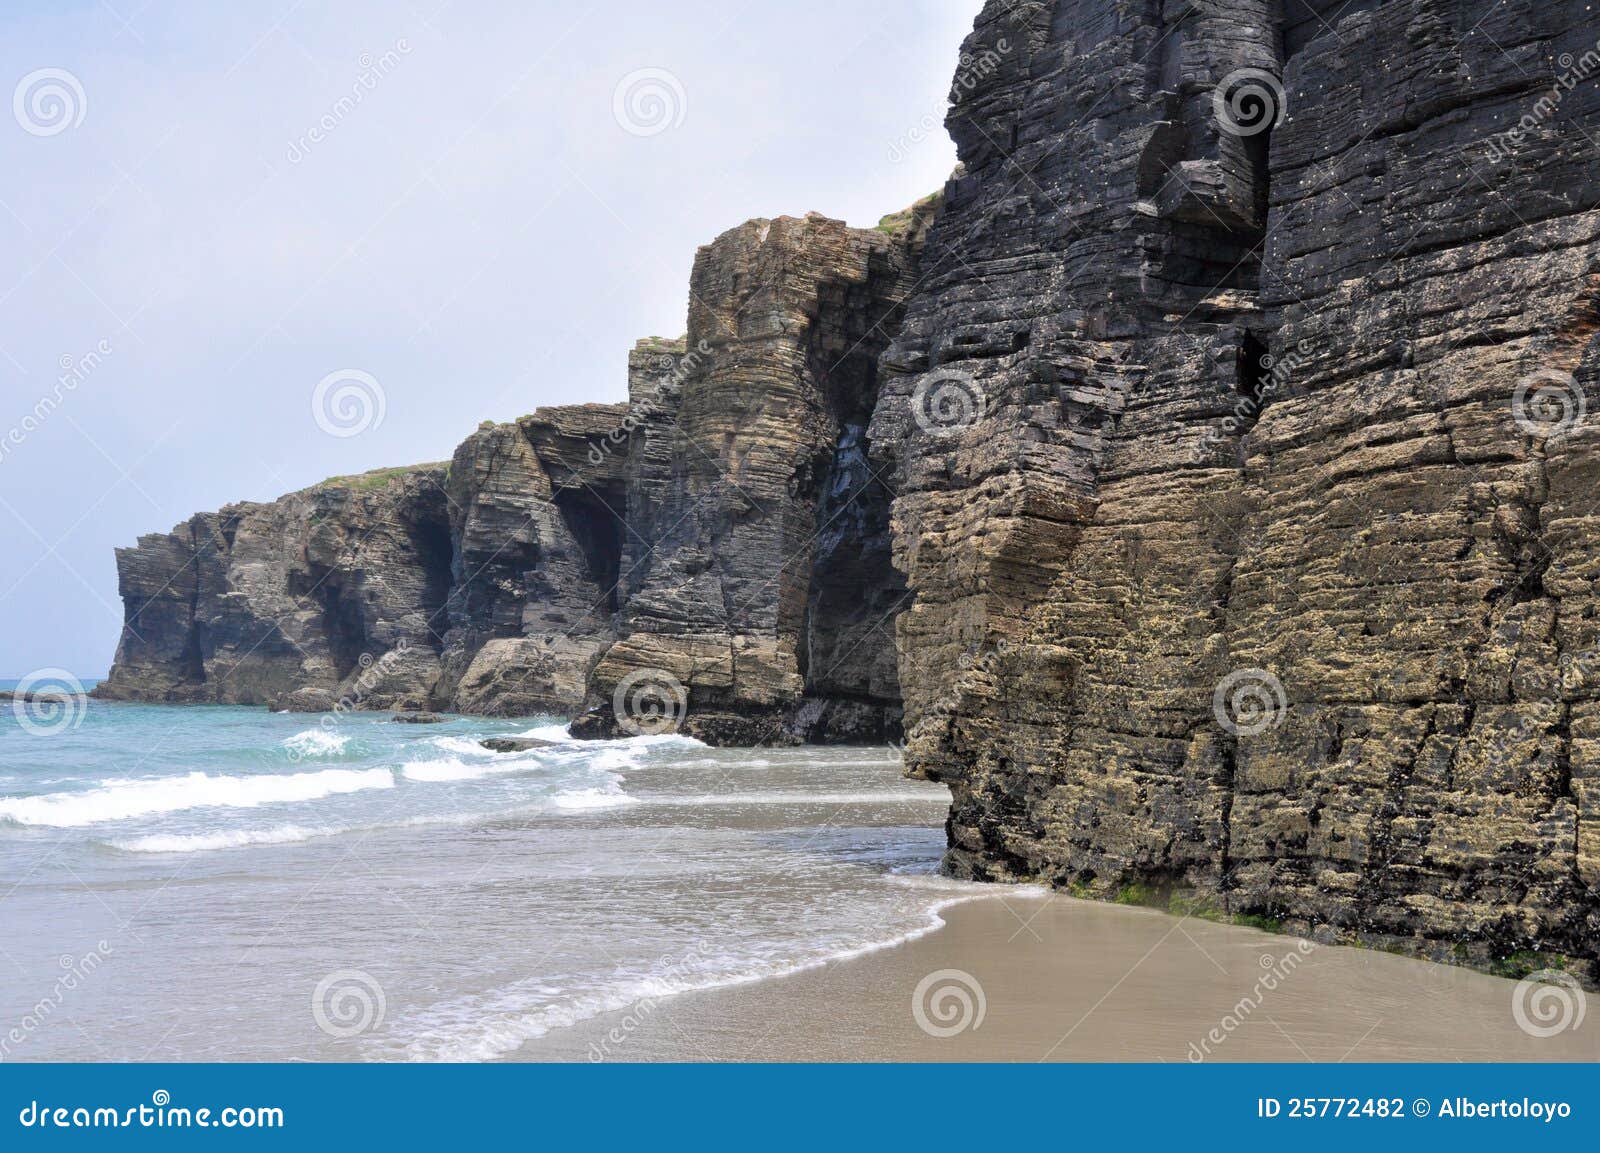 the beach of the cathedrals (spain)